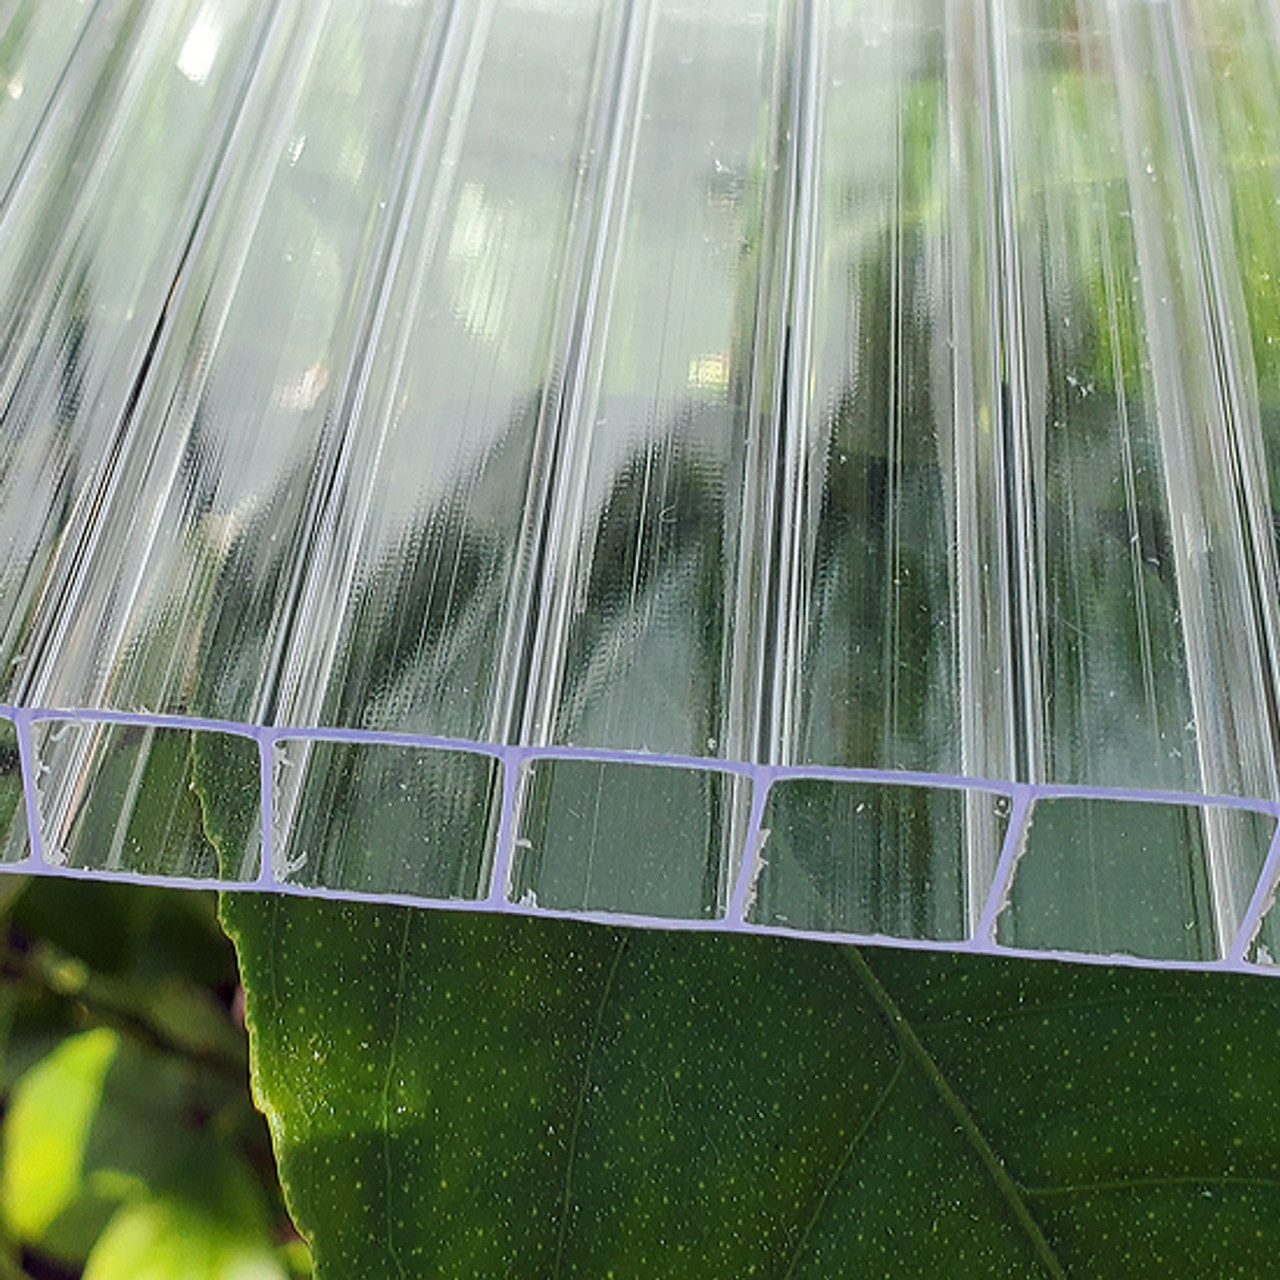 10mm TwinWall Polycarbonate Sheet 
7/16" thick, insulates and brings the light in